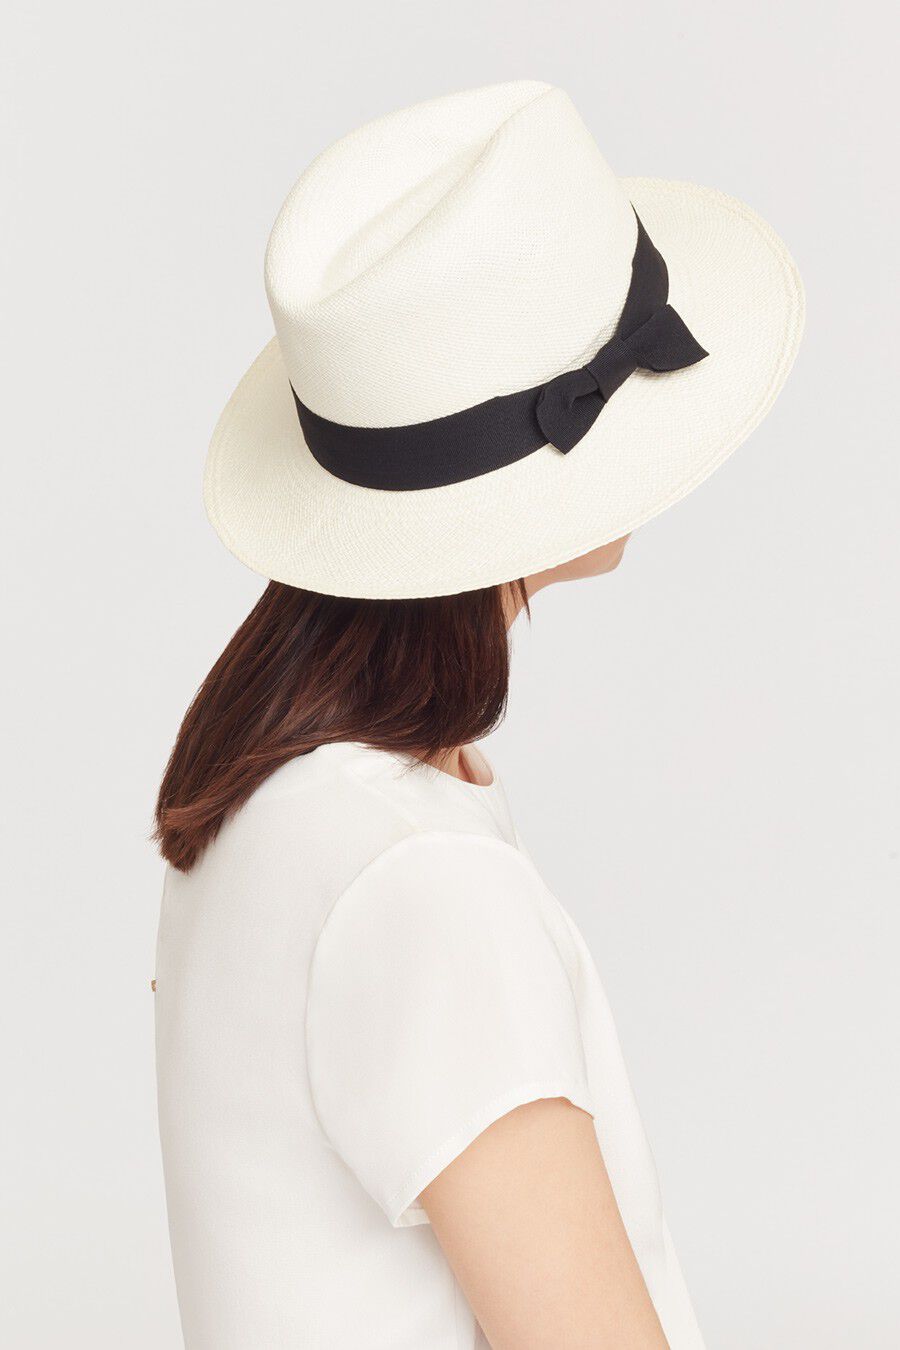 Woman wearing a hat, viewed from the back.